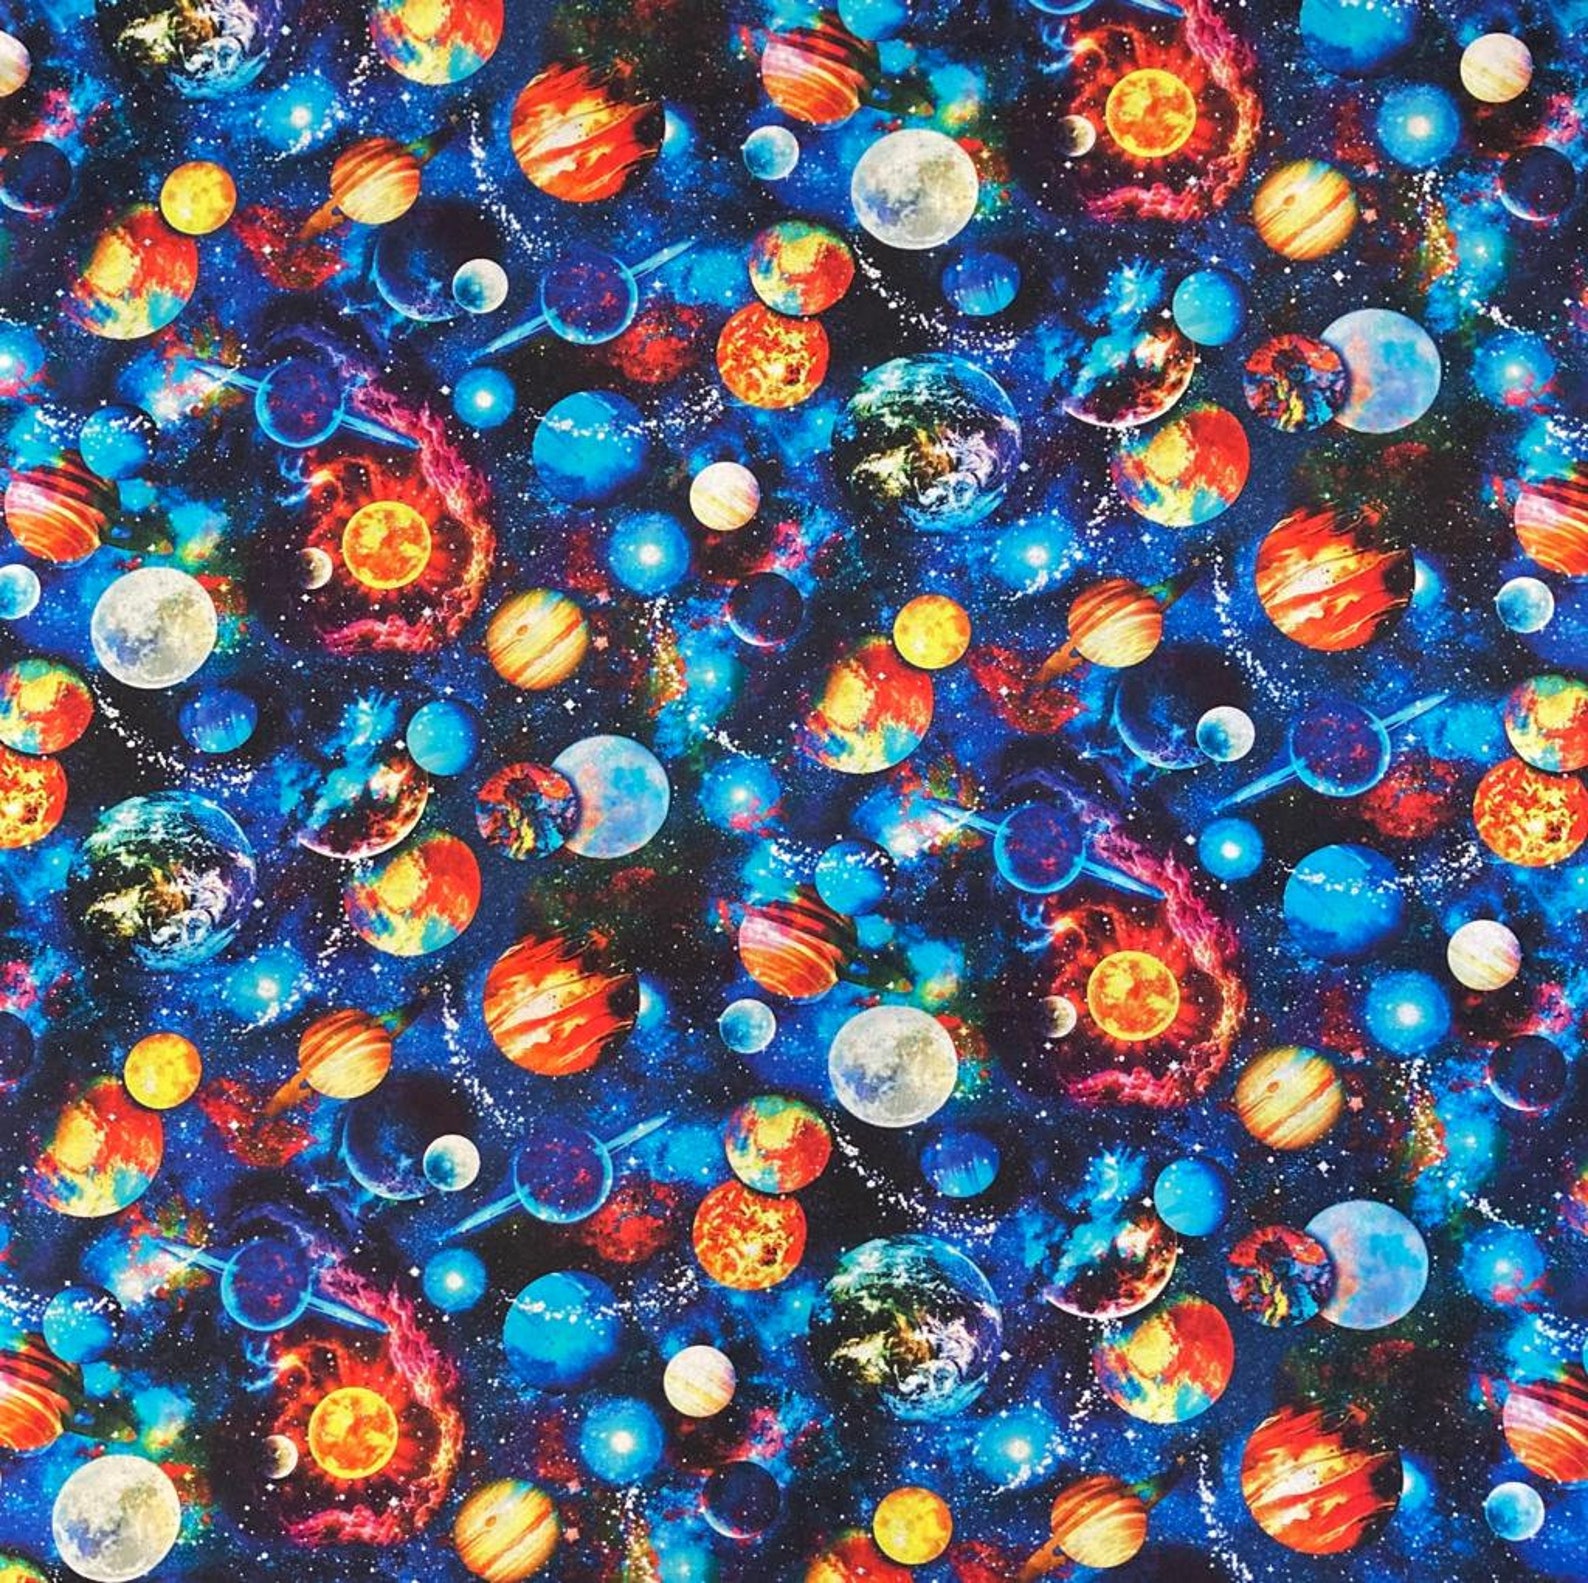 Beautiful Galaxy Designer Fabric / Material 100% Cotton by - Etsy UK